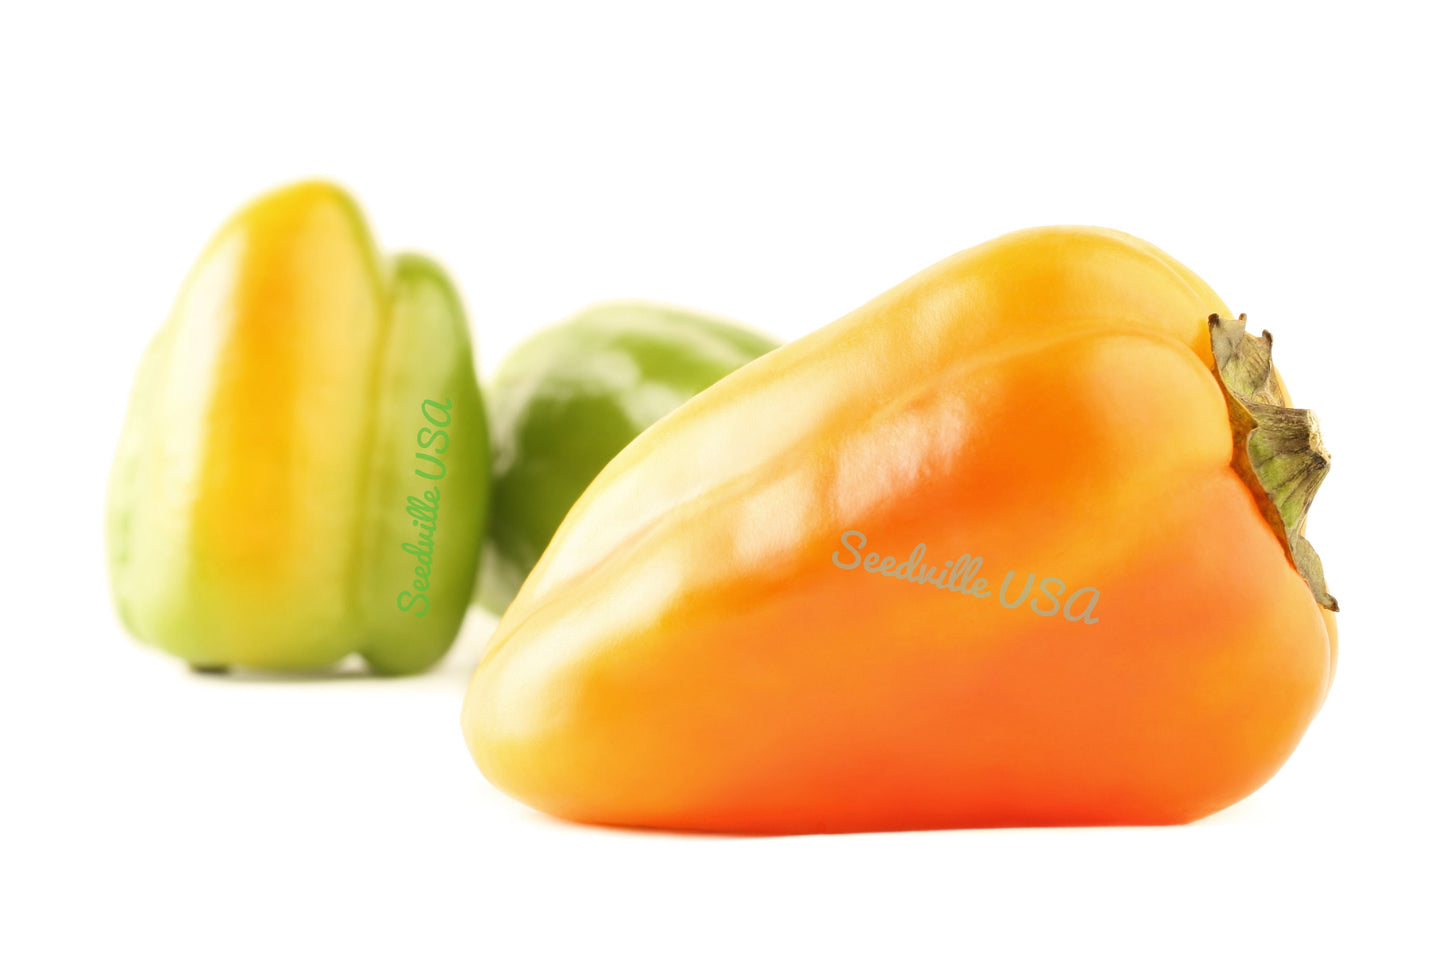 25 Organic GIANT SZEGEDI PEPPER Capsicum Annuum Hungarian Sweet Paprika / Tapered Bell White Yellow Orange Red Seeds